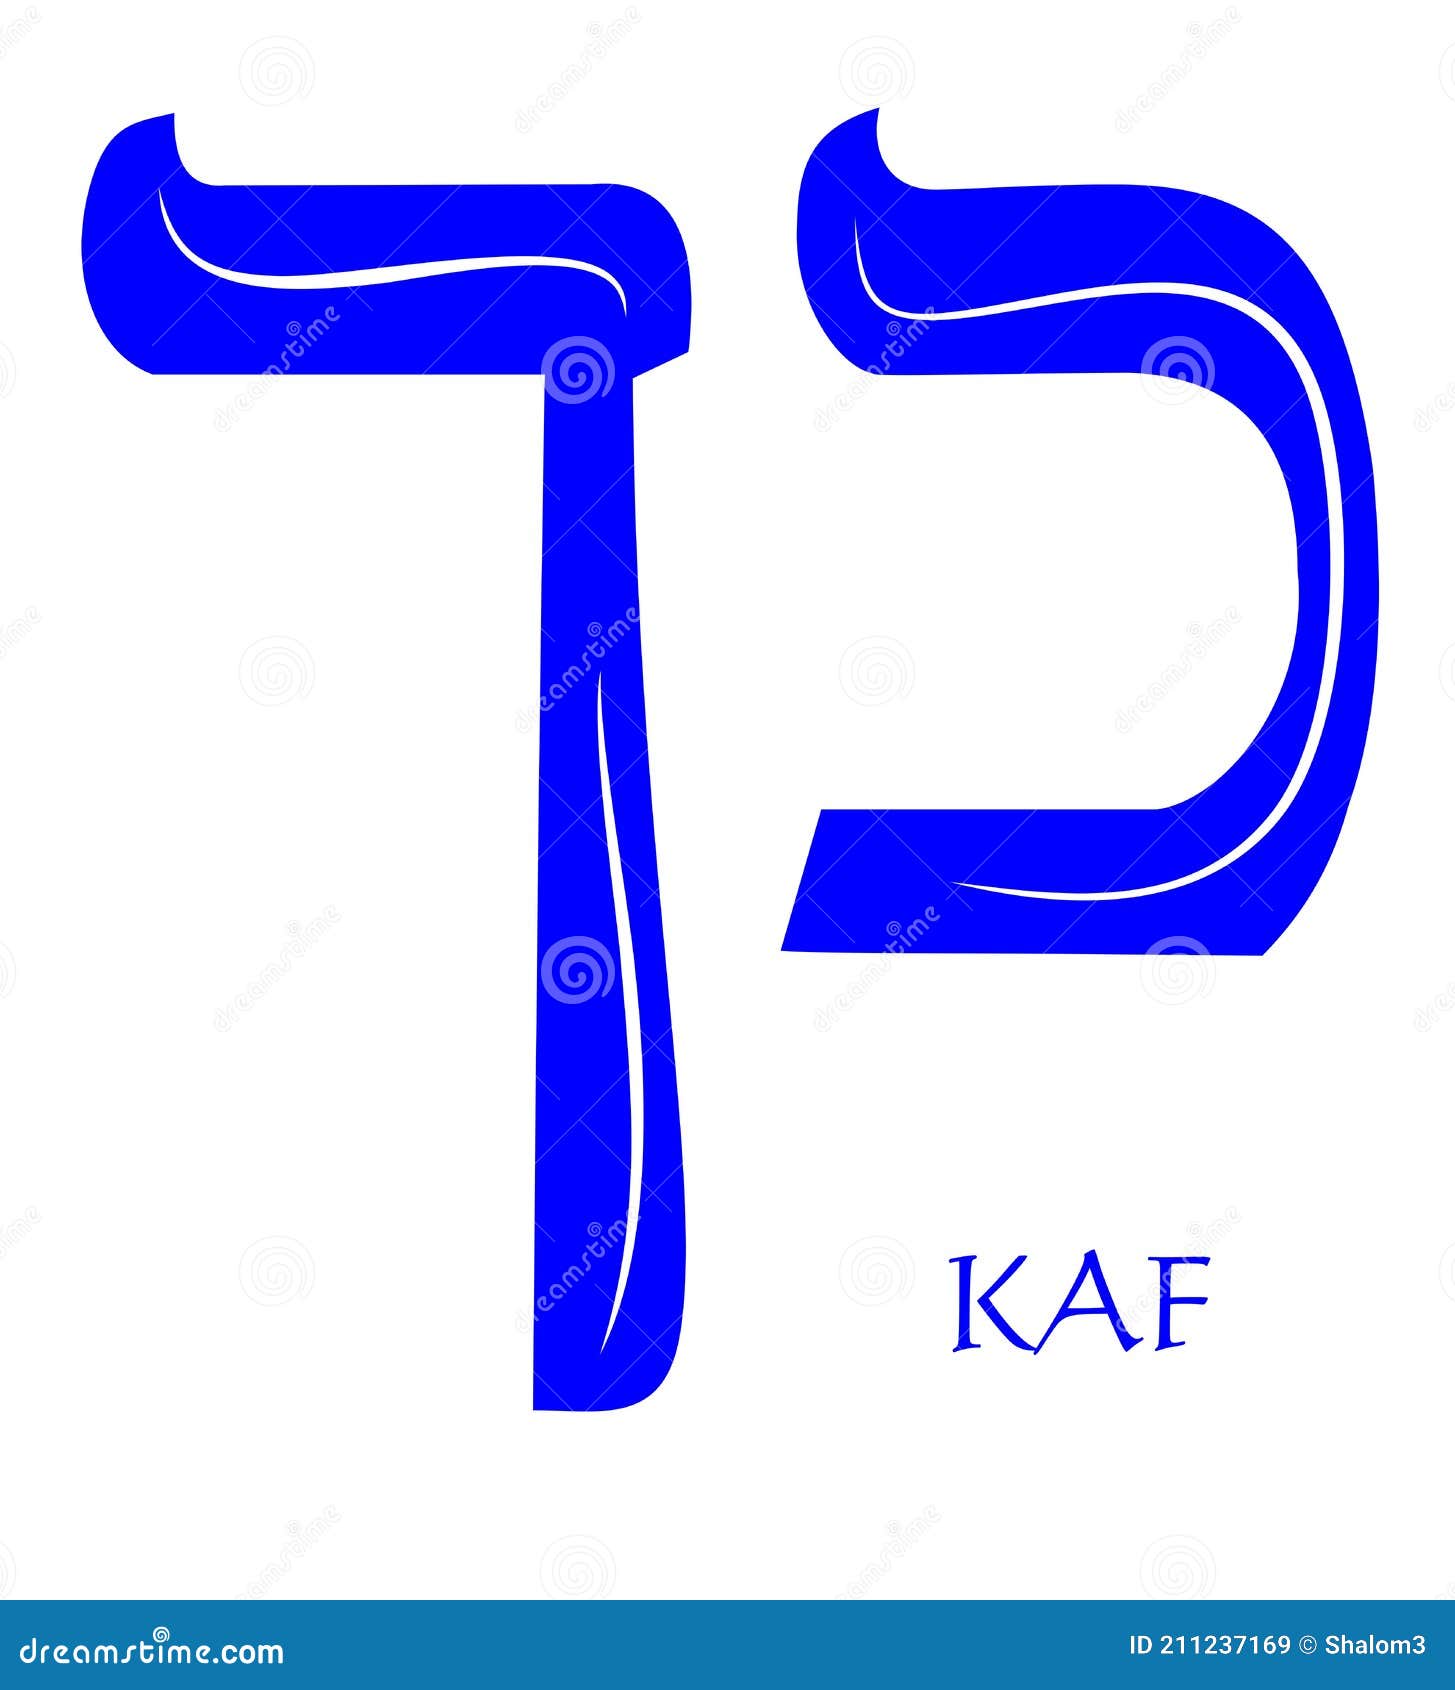 hebrew alphabet - letter kaf, gematria fist , numeric value 20, blue font decorated with white wavy line, the